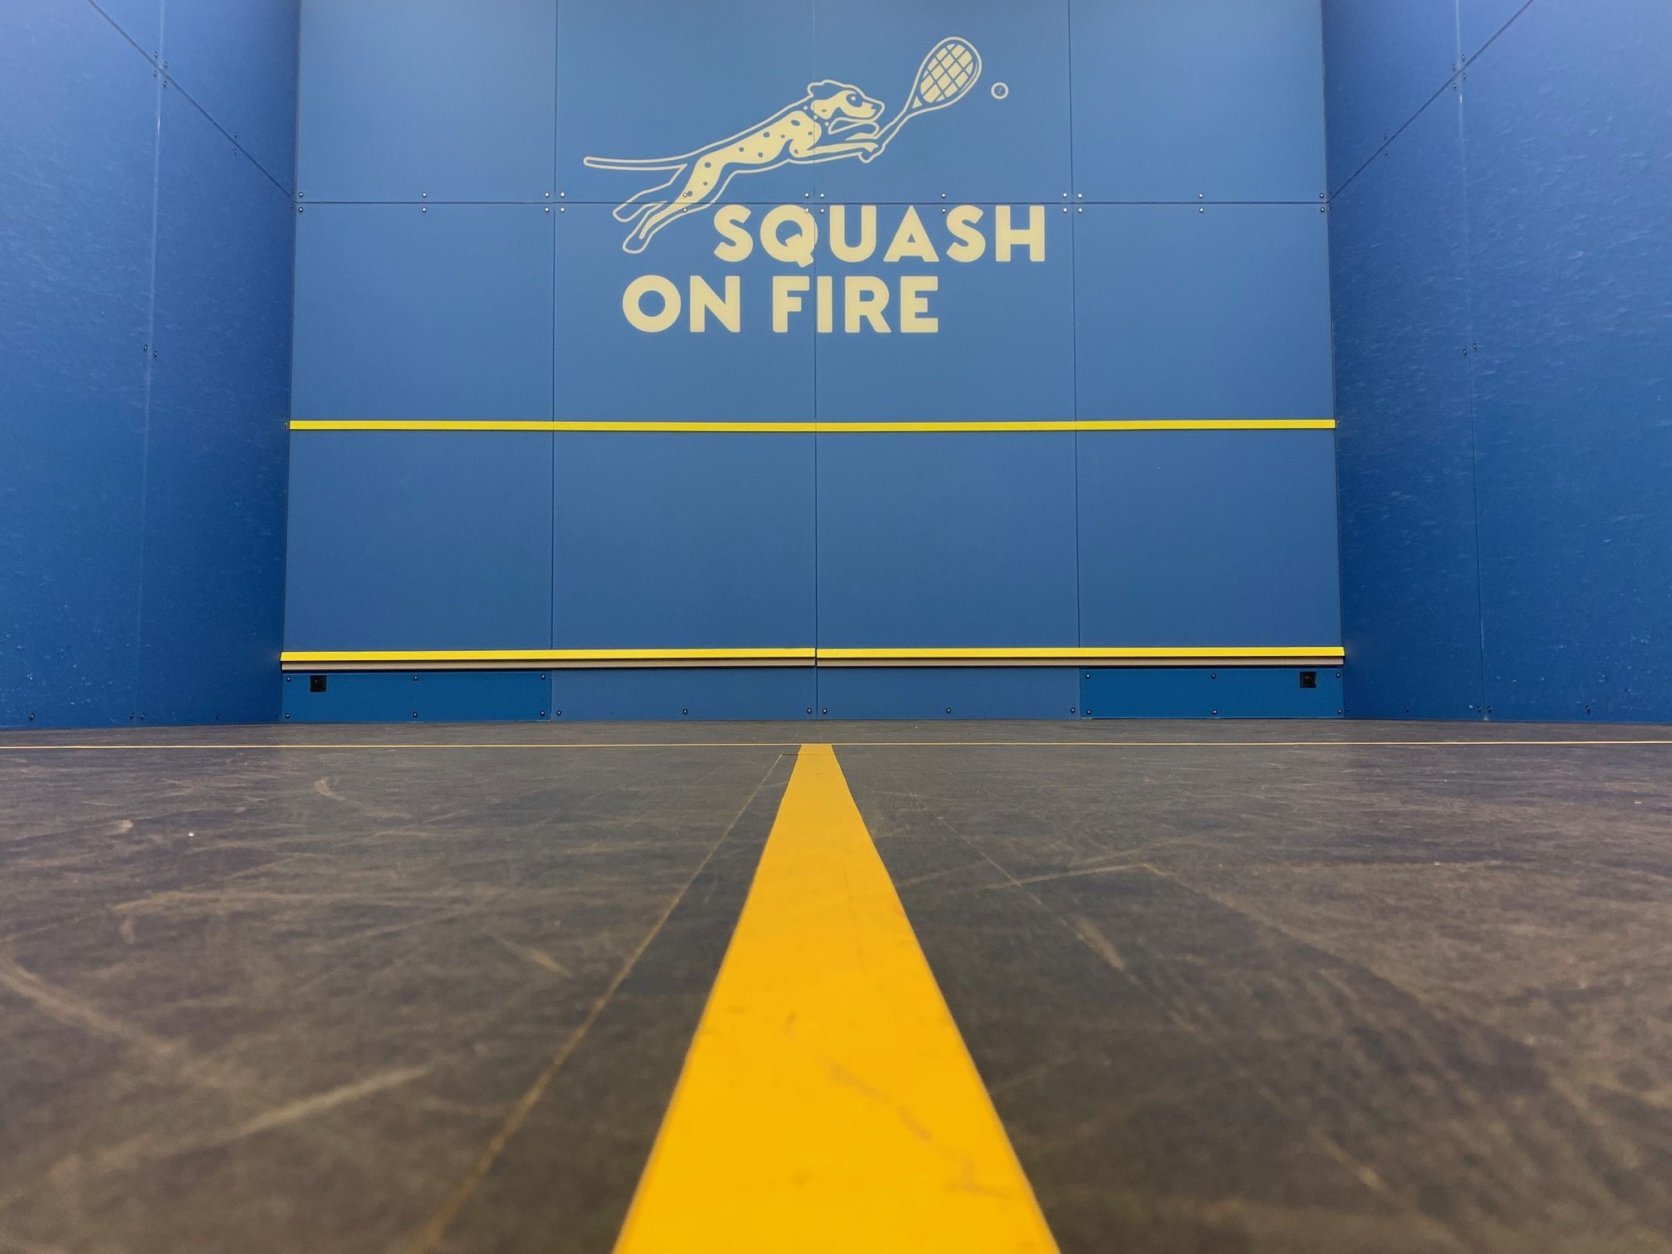 One of the courts at Squash On Fire. Squash courts are 21 feet wide and 32 feet deep. (WTOP/Noah Frank)